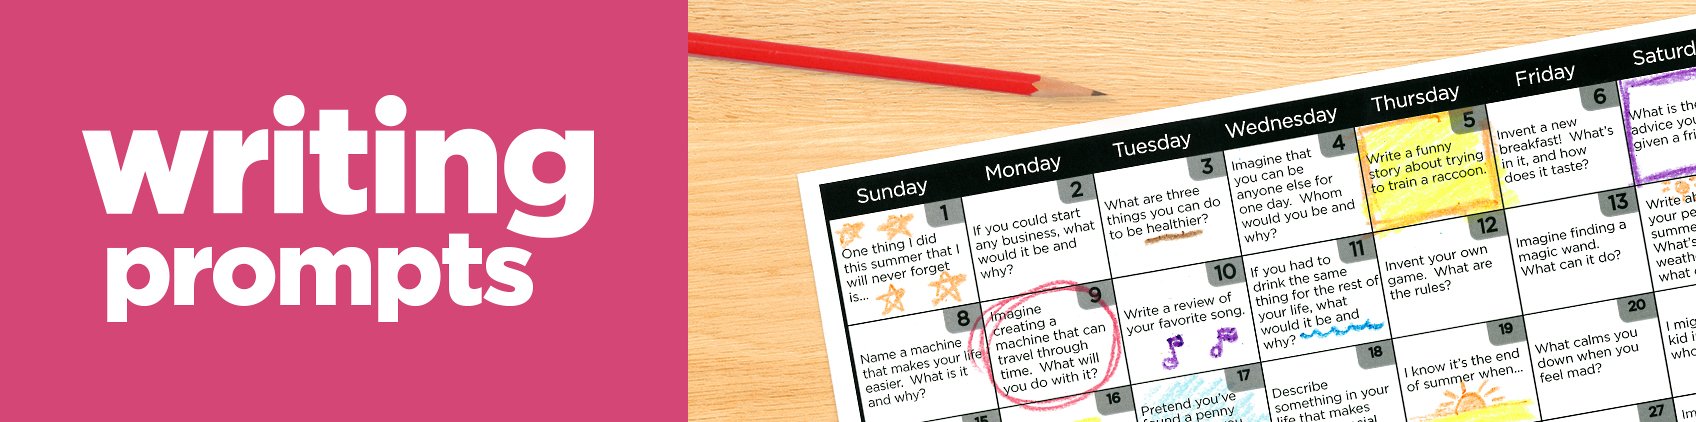 Download our free calendars with engaging writing prompts for the entire year!